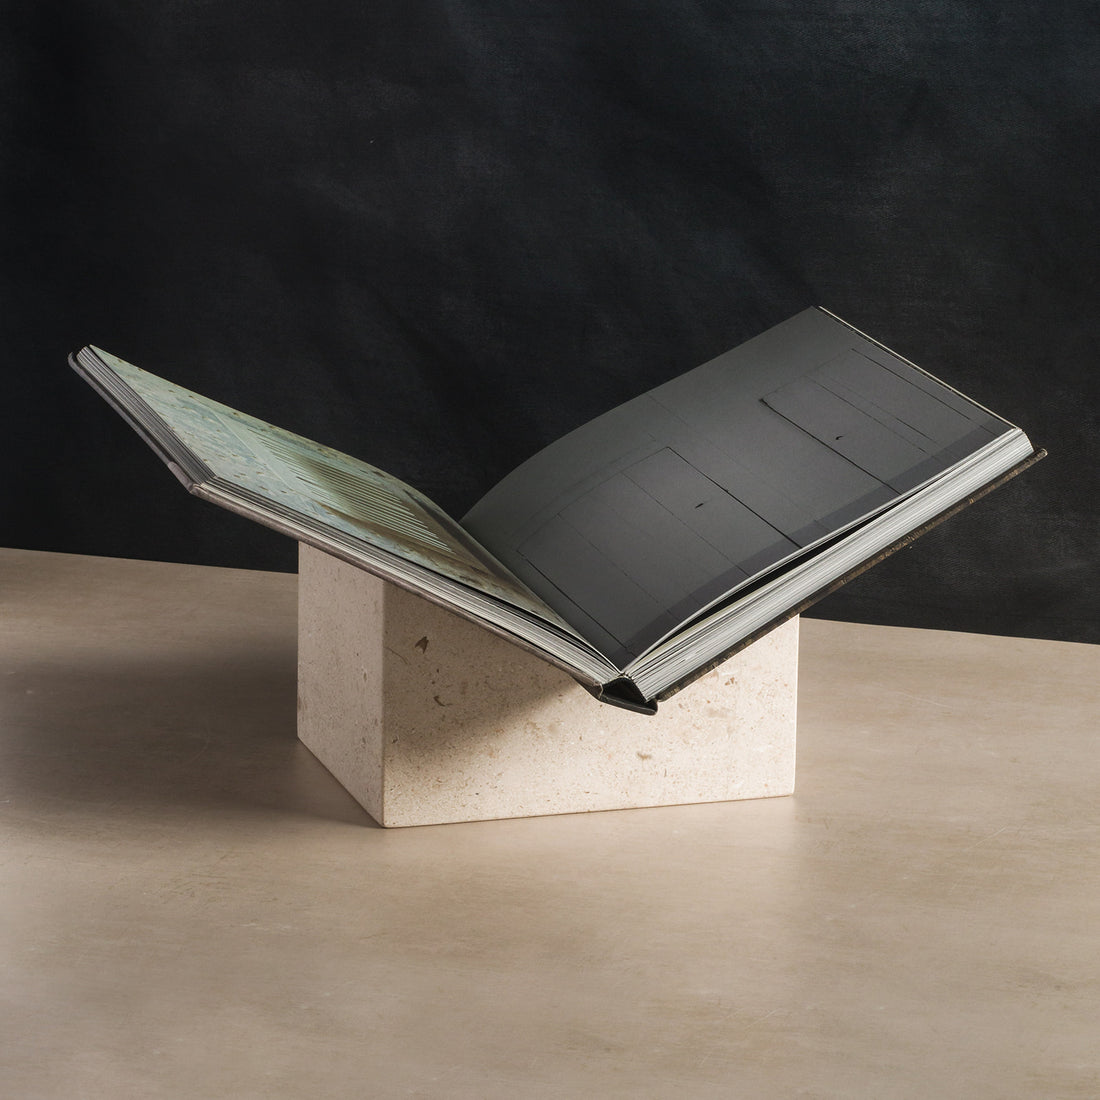 Bookstand holder made from cream limestone displaying a book